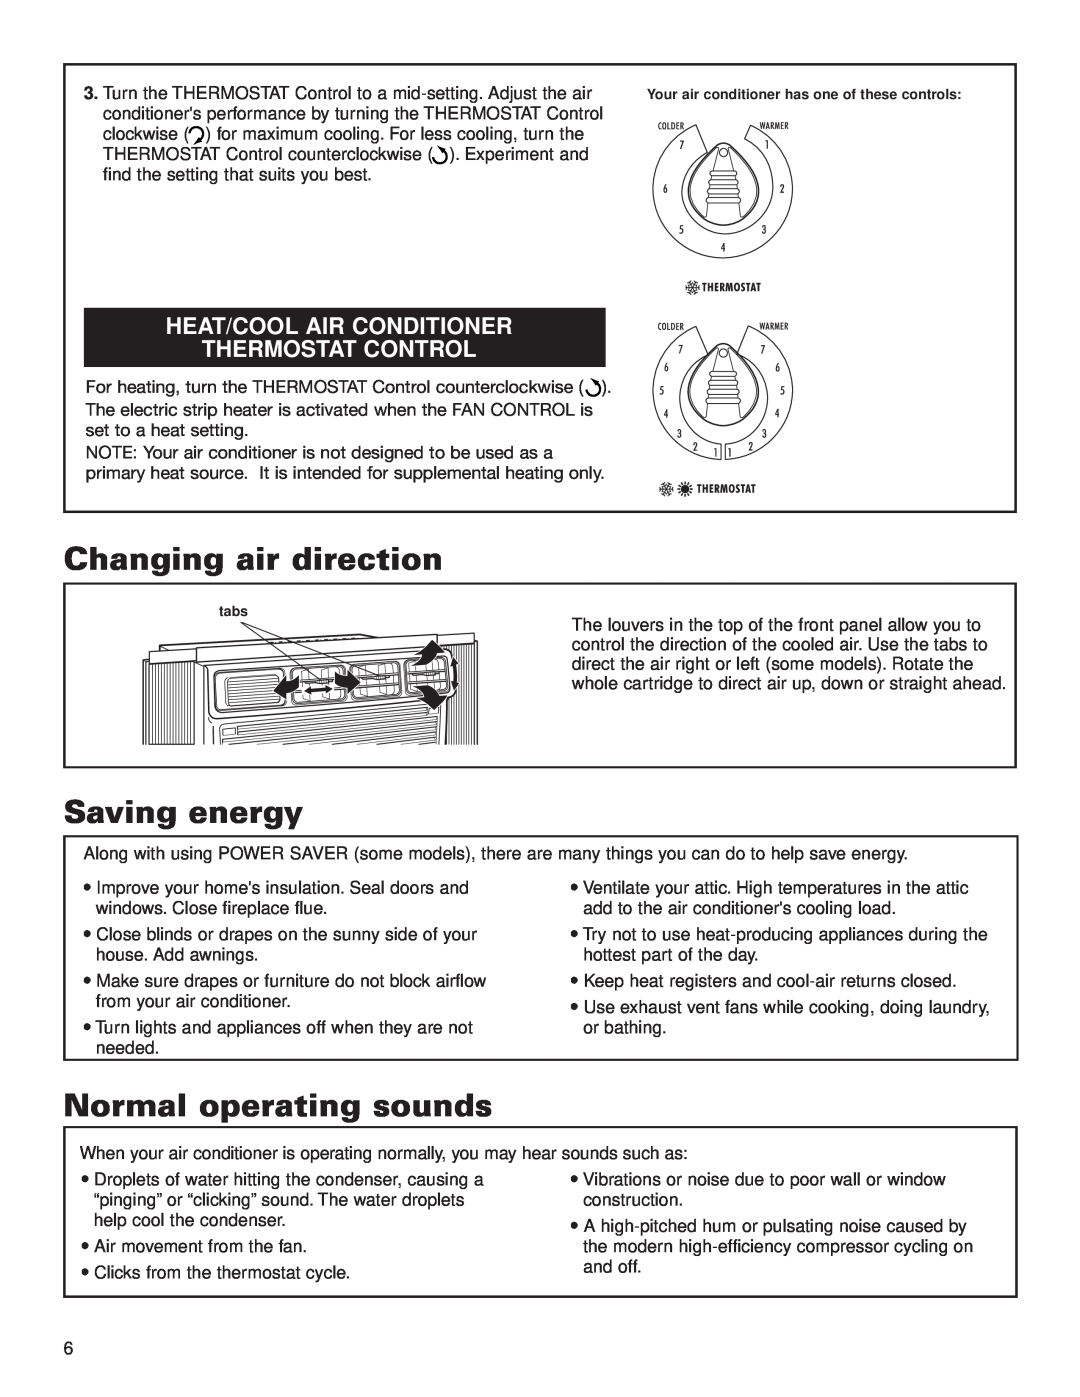 Whirlpool ACE082XH0 manual Changing air direction, Saving energy, Normal operating sounds 